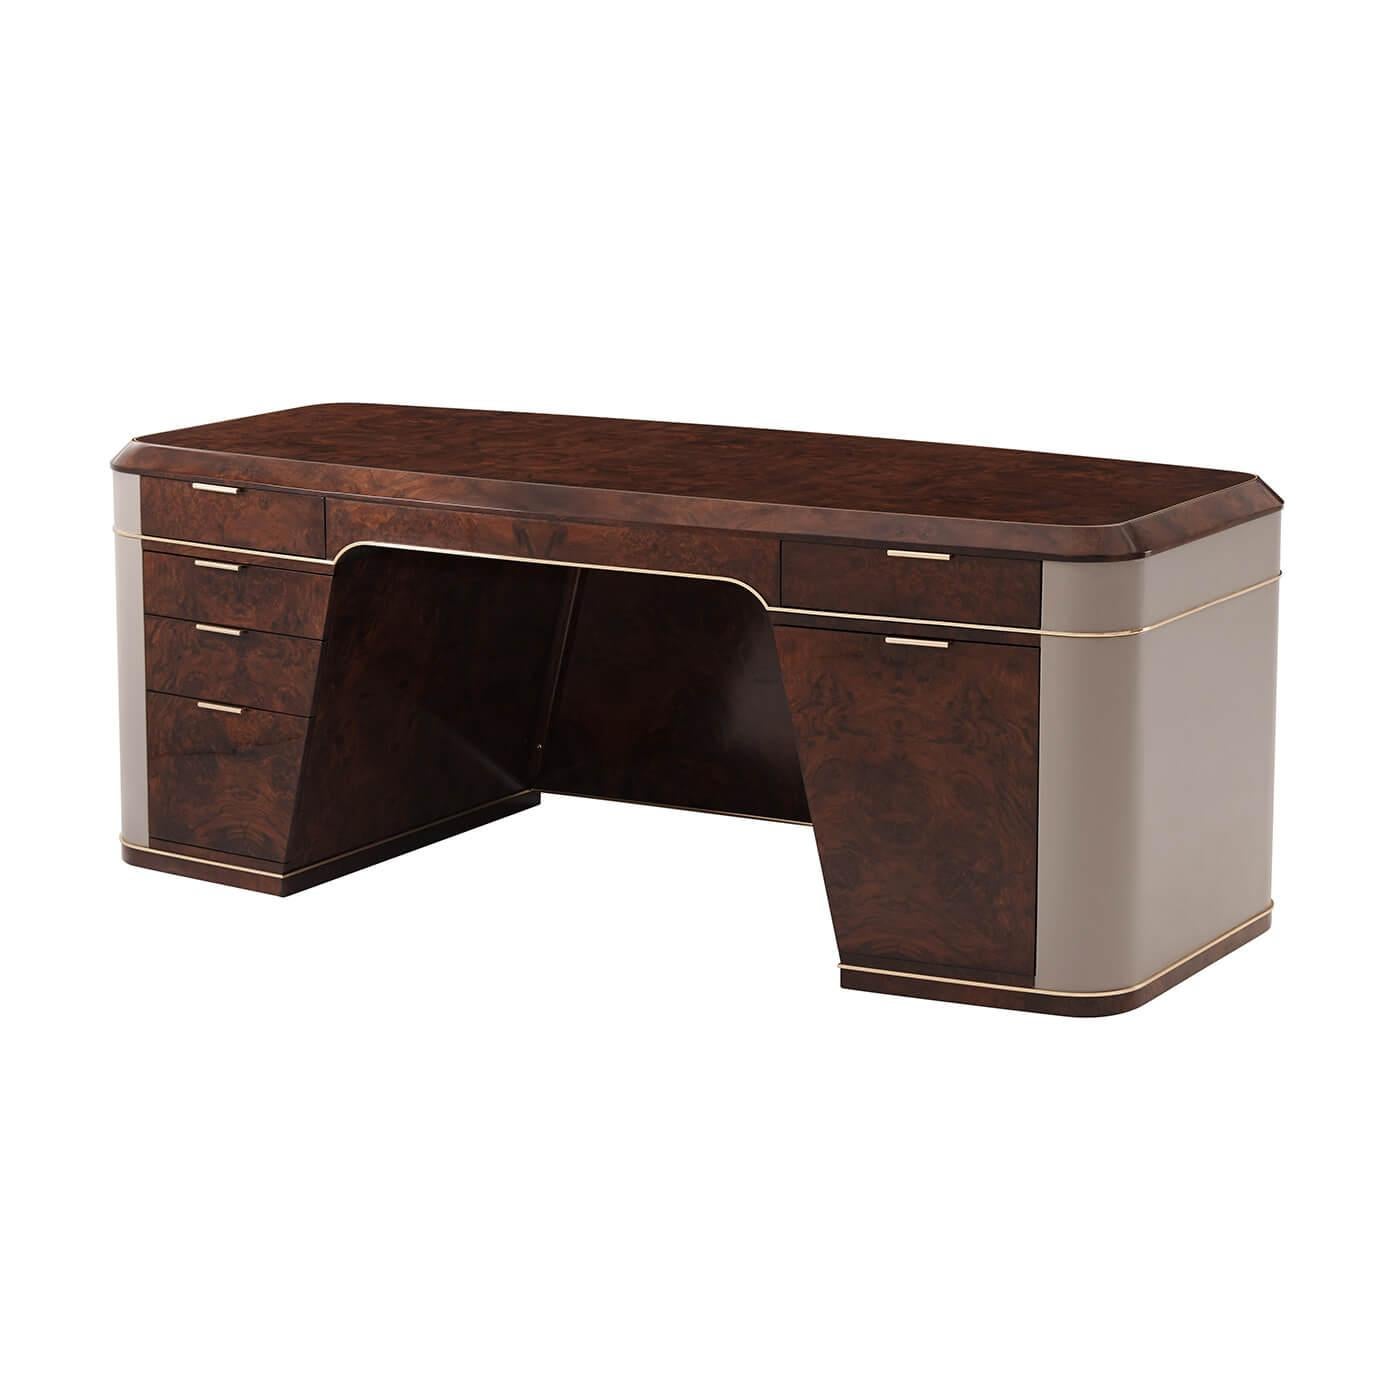 An Art Deco style burl pedestal desk with brass moldings and trim, a wonderful burl walnut veneer to the hull shaped case, with leather paneled wrapped sides and with two frieze drawers with brass handles, the spacious 33